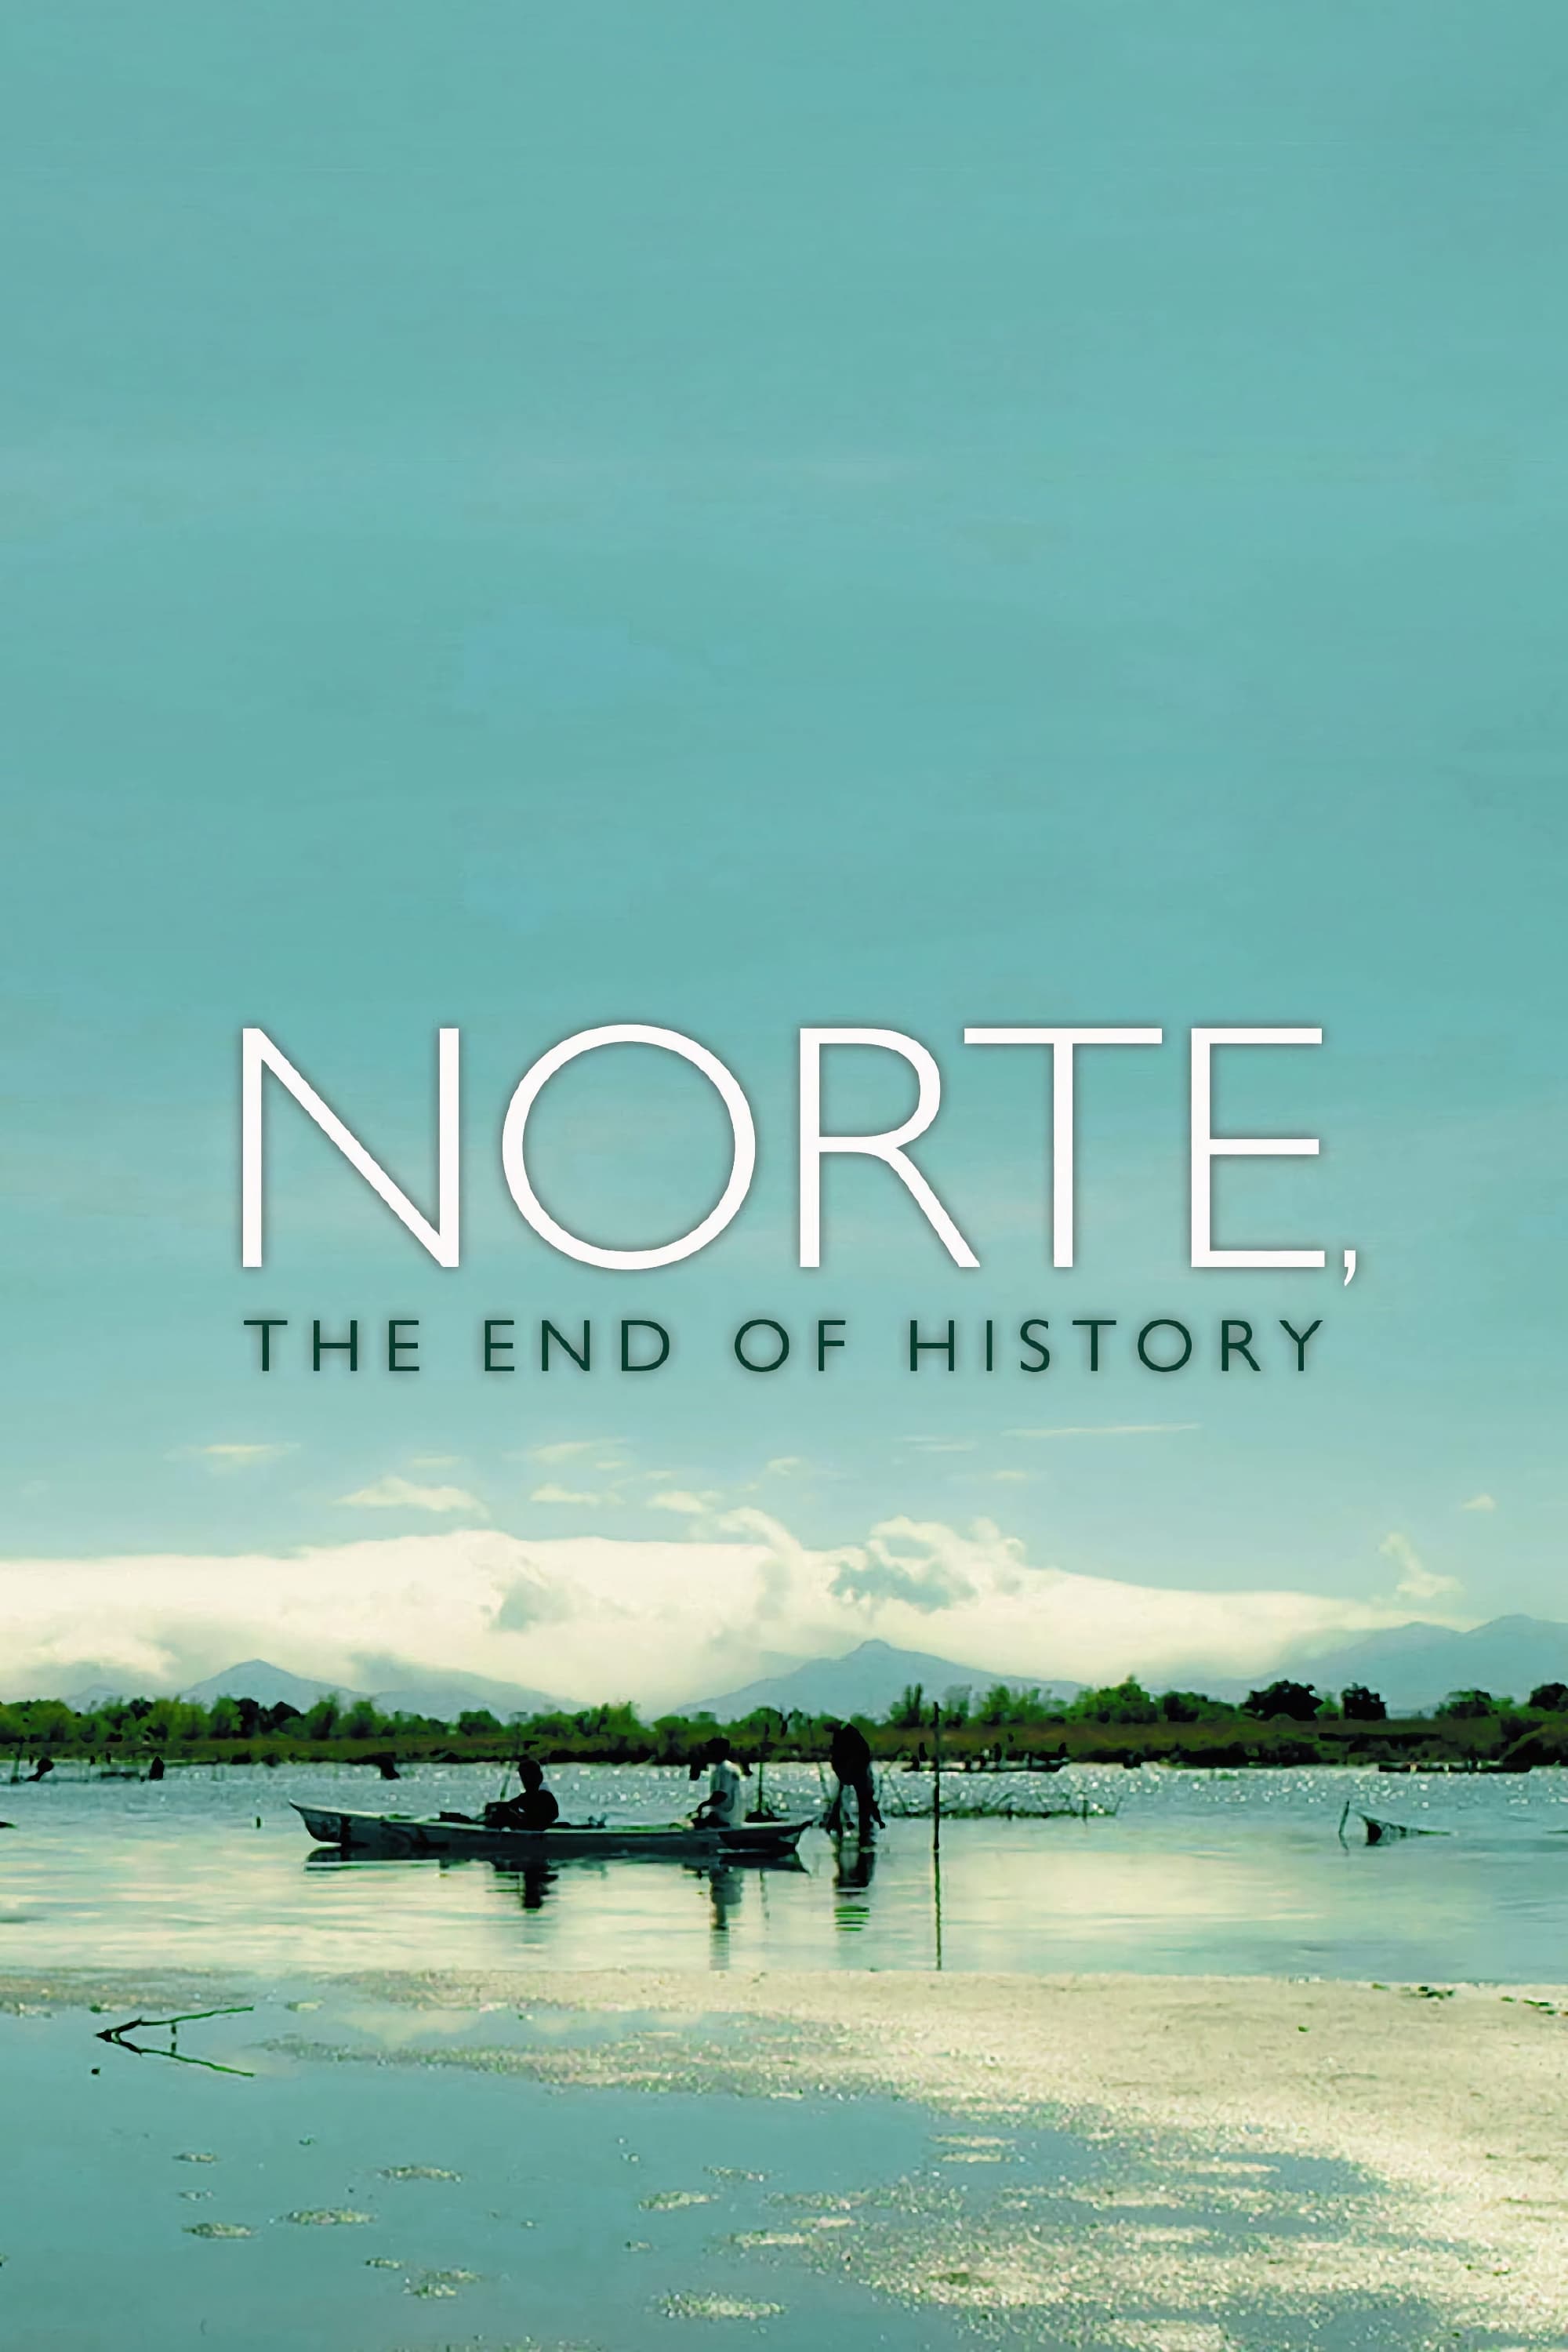 Norte, the End of History (2013)